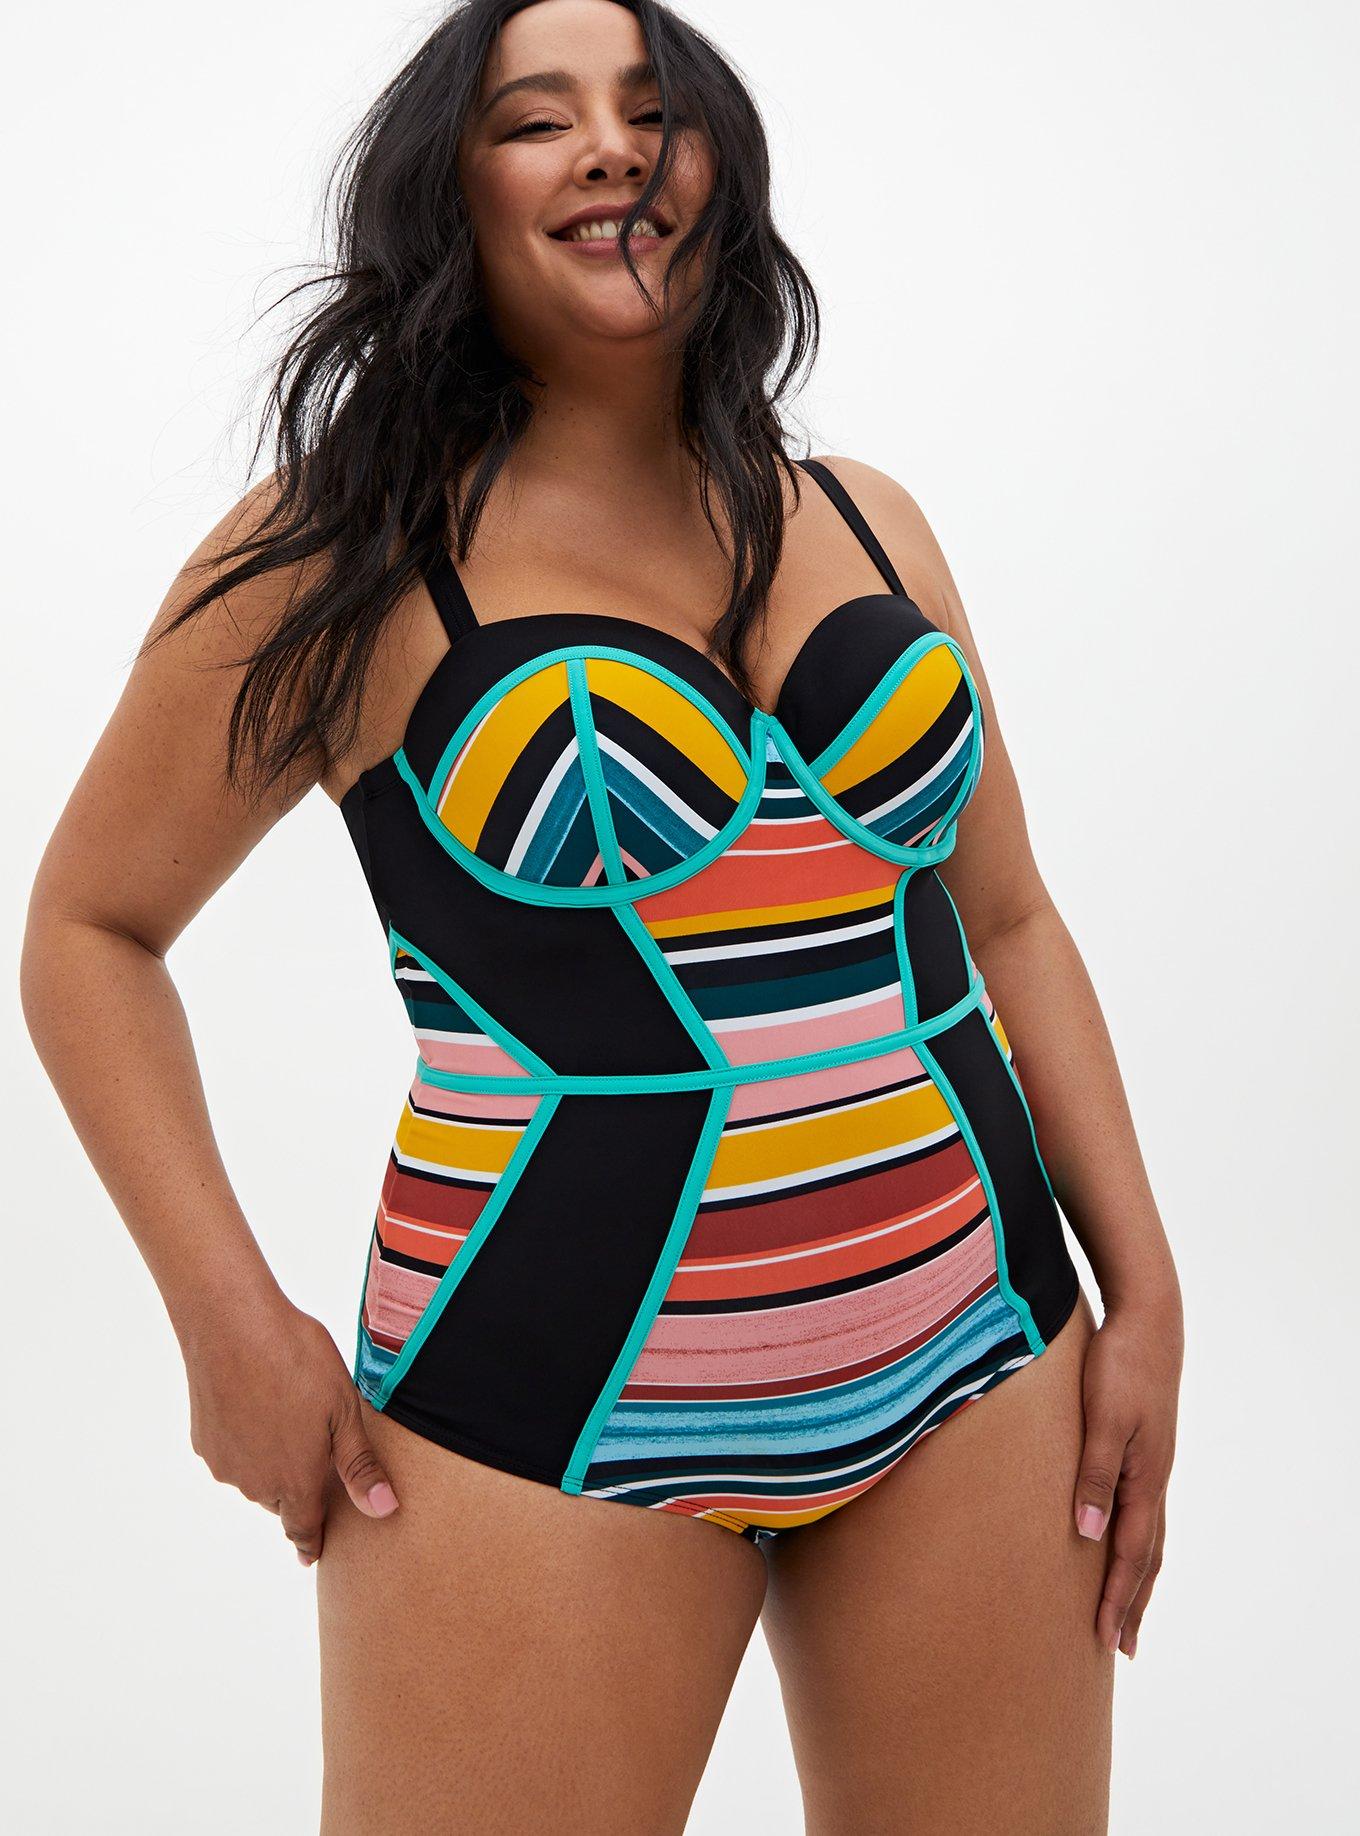 Lv Swimsuit One Piece Price  Natural Resource Department